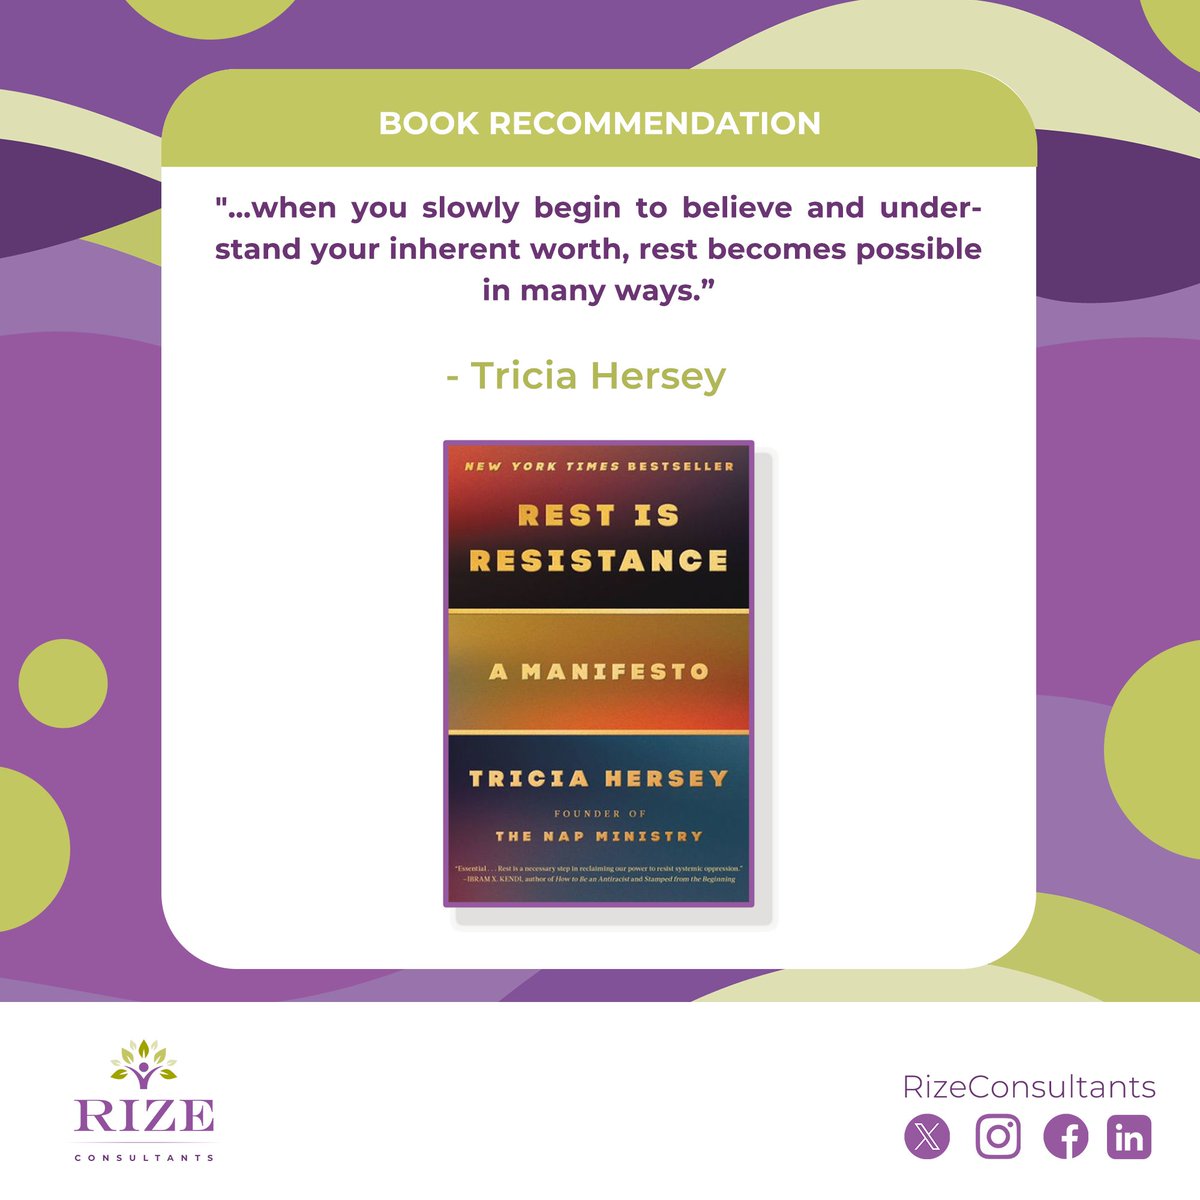 Embrace your worth and the transformative power of rest, as highlighted by Tricia Hersey. Redefine self-care as essential to recognizing your value.

#RizeConsultants #SelfCareJourney #EmbraceYourWorth #MentalHealthAwarene